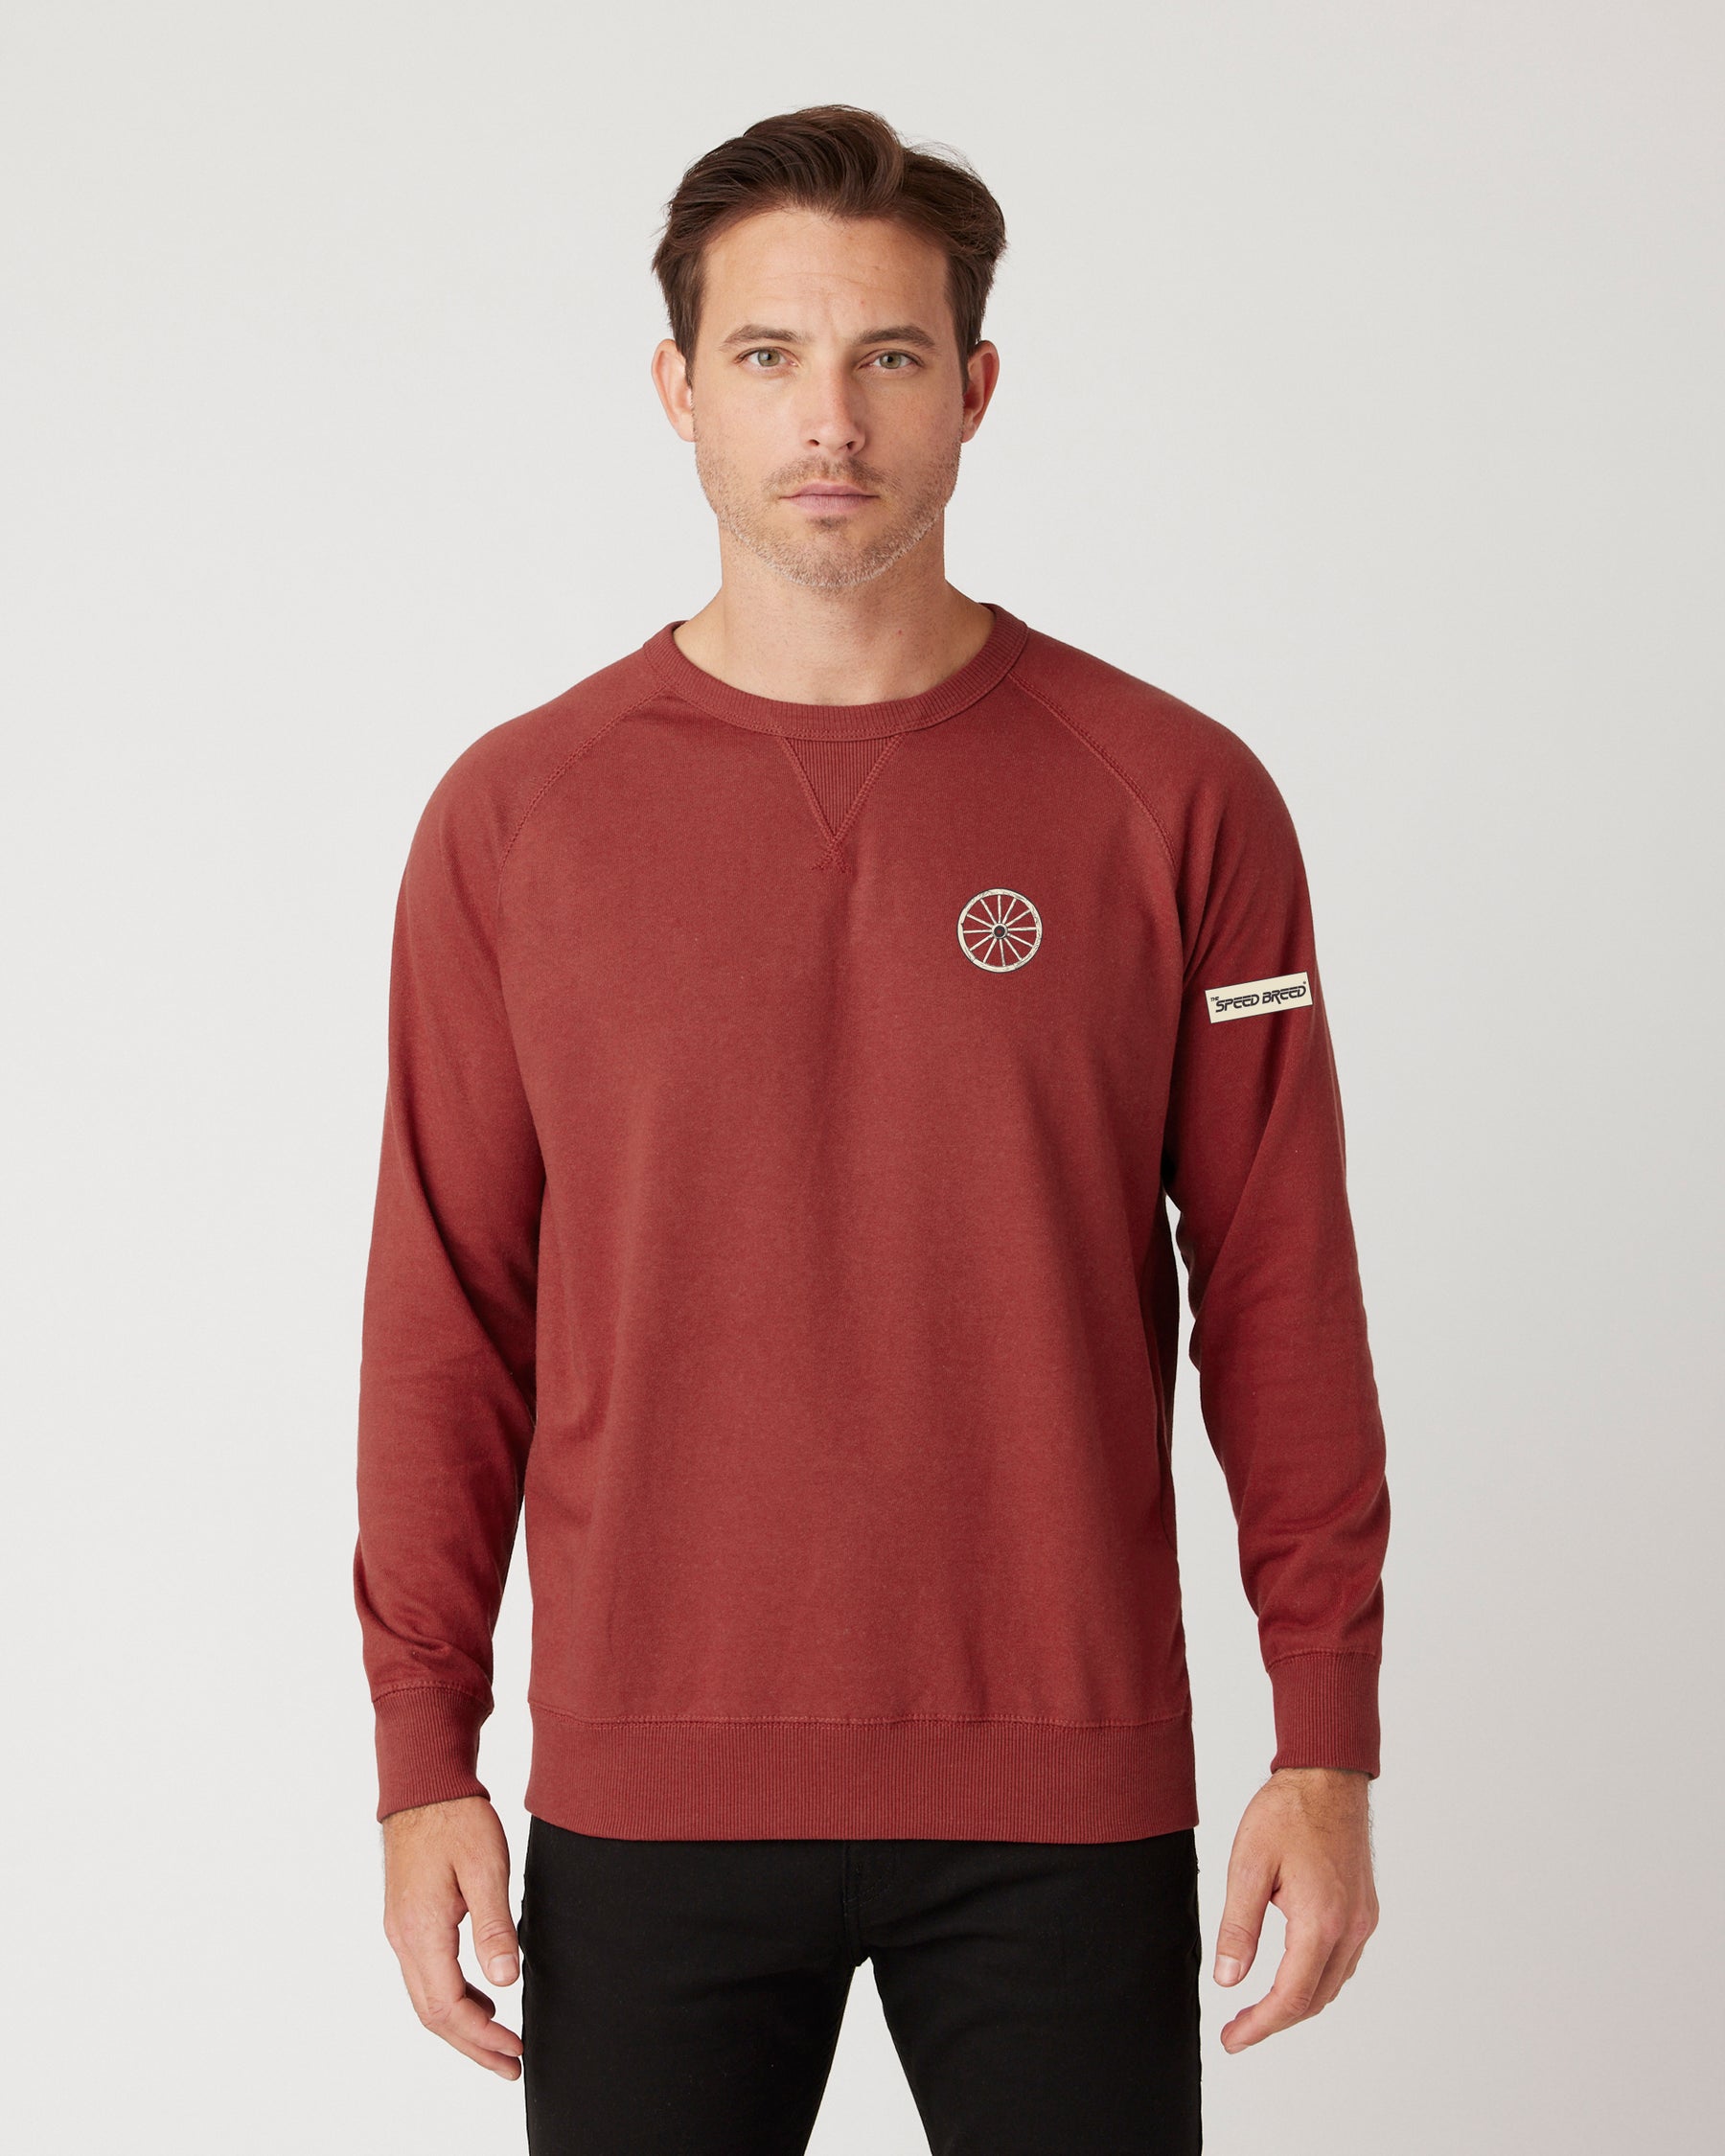 CHARIOTS EMBROIDERED UNISEX FRENCH TERRY CREW NECK SWEATER (Spice Red)